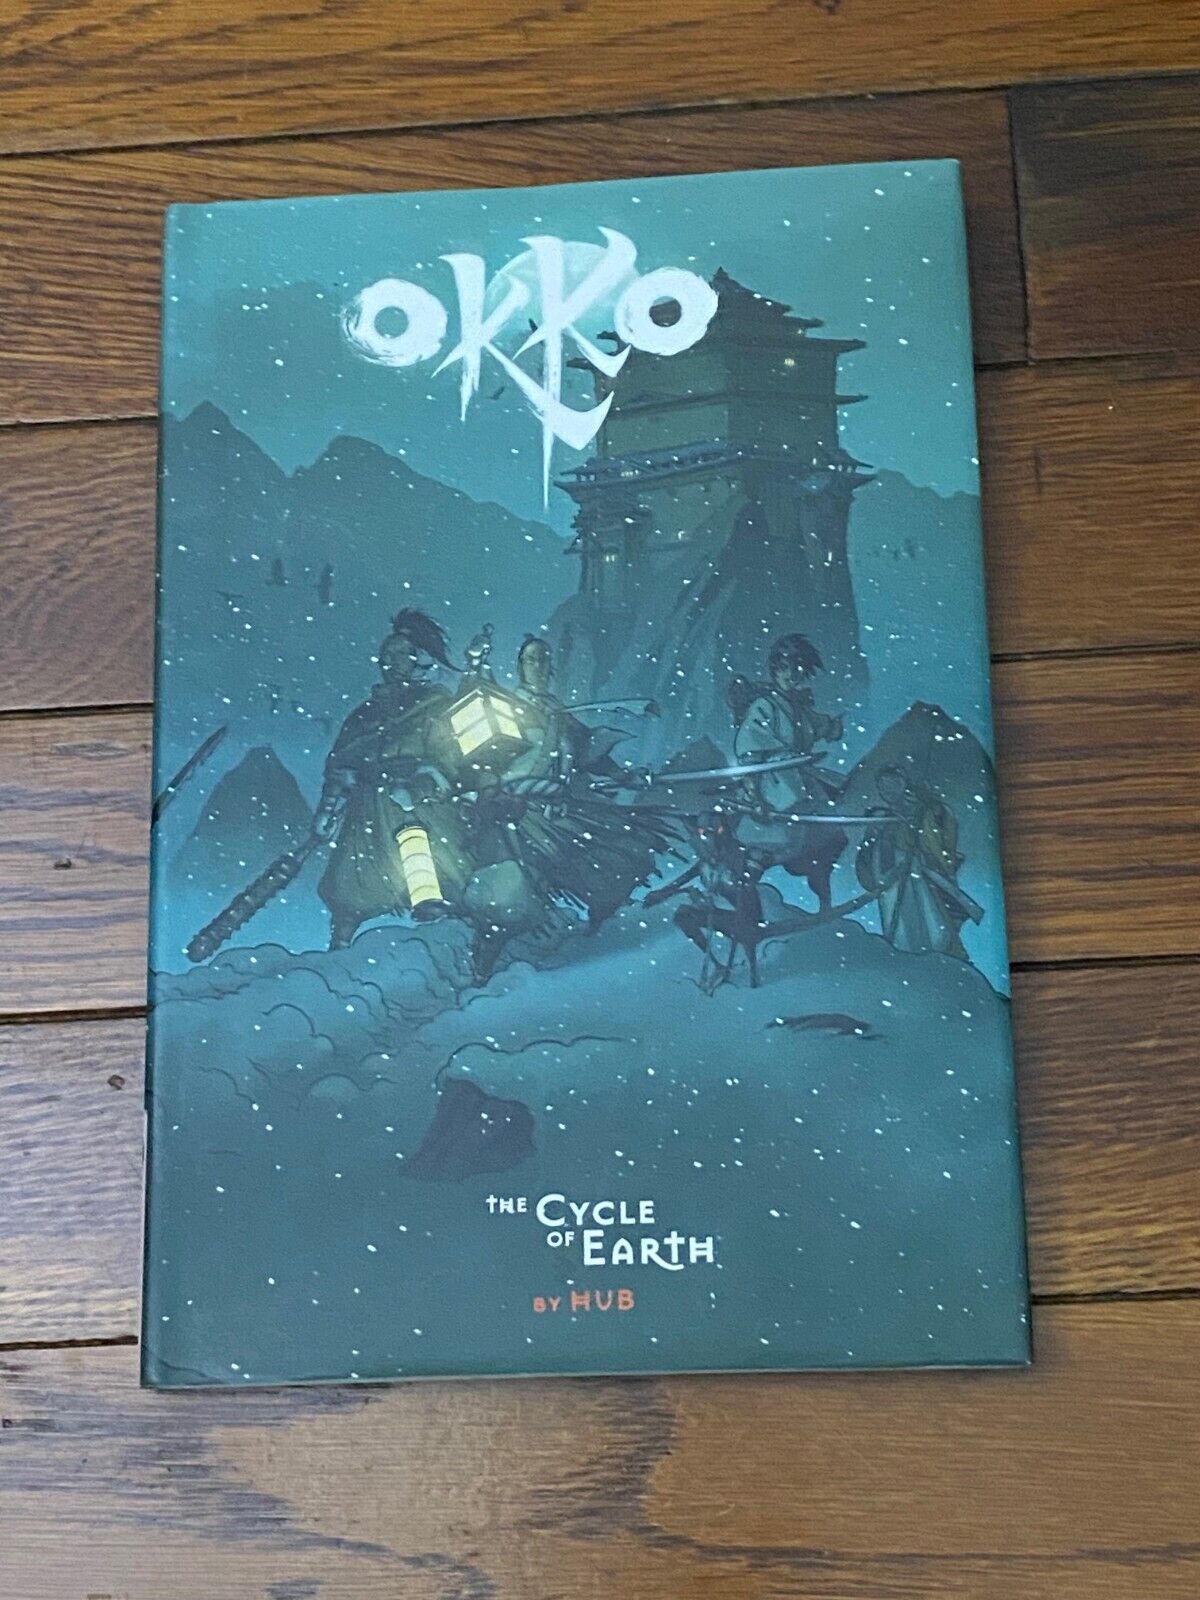 OKKO The Cycle Of Earth HC (Archaia Studios 2008) Hardcover Graphic Novel